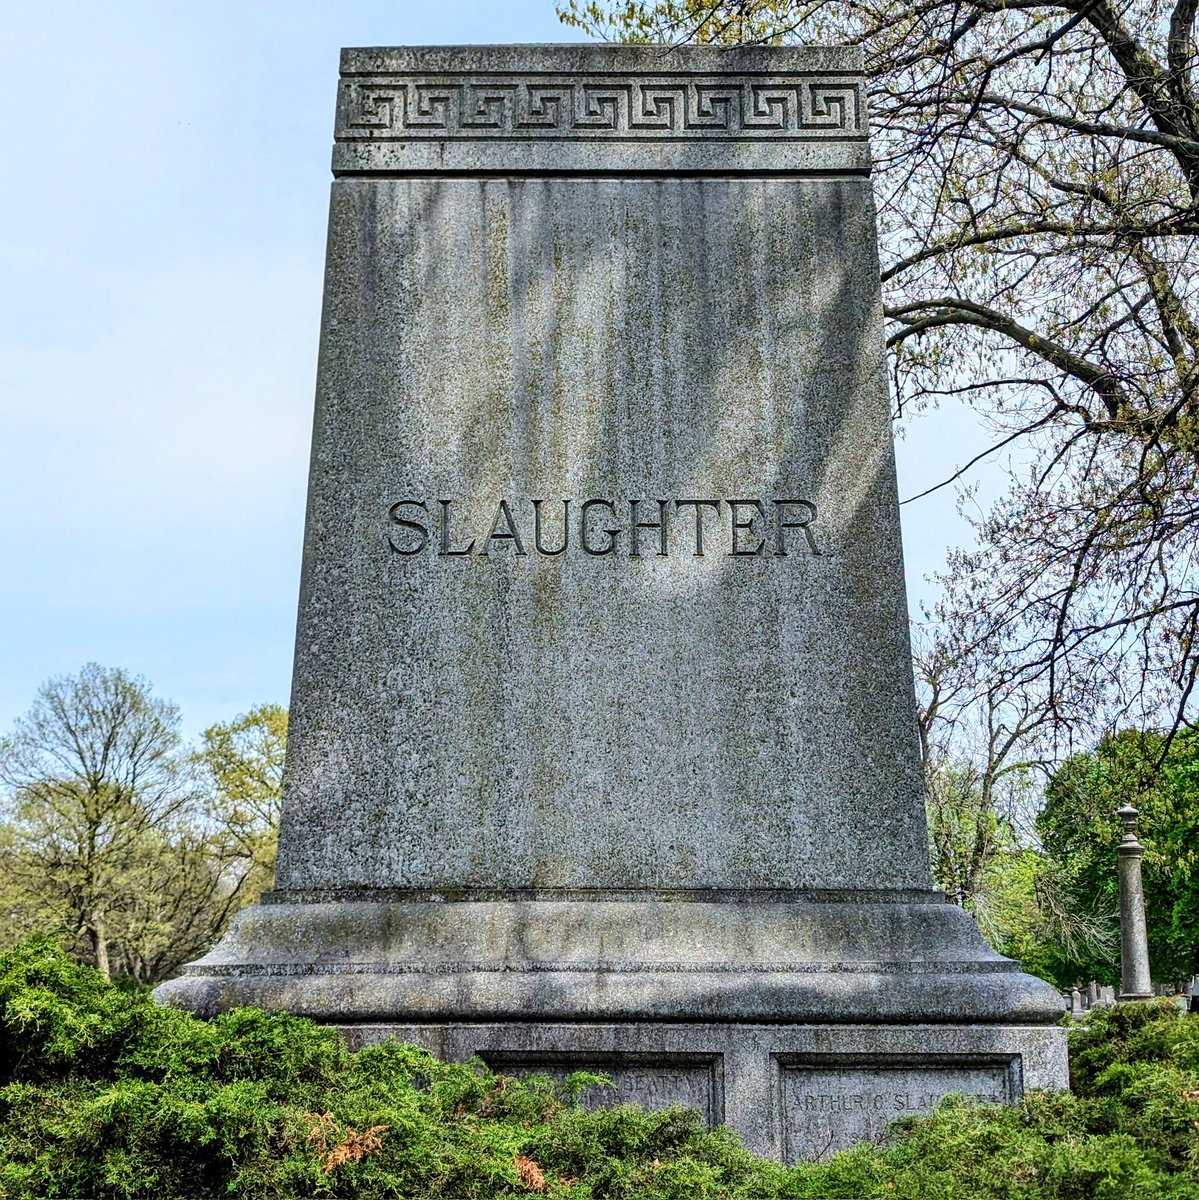 Found a Slaughter at the cemetery